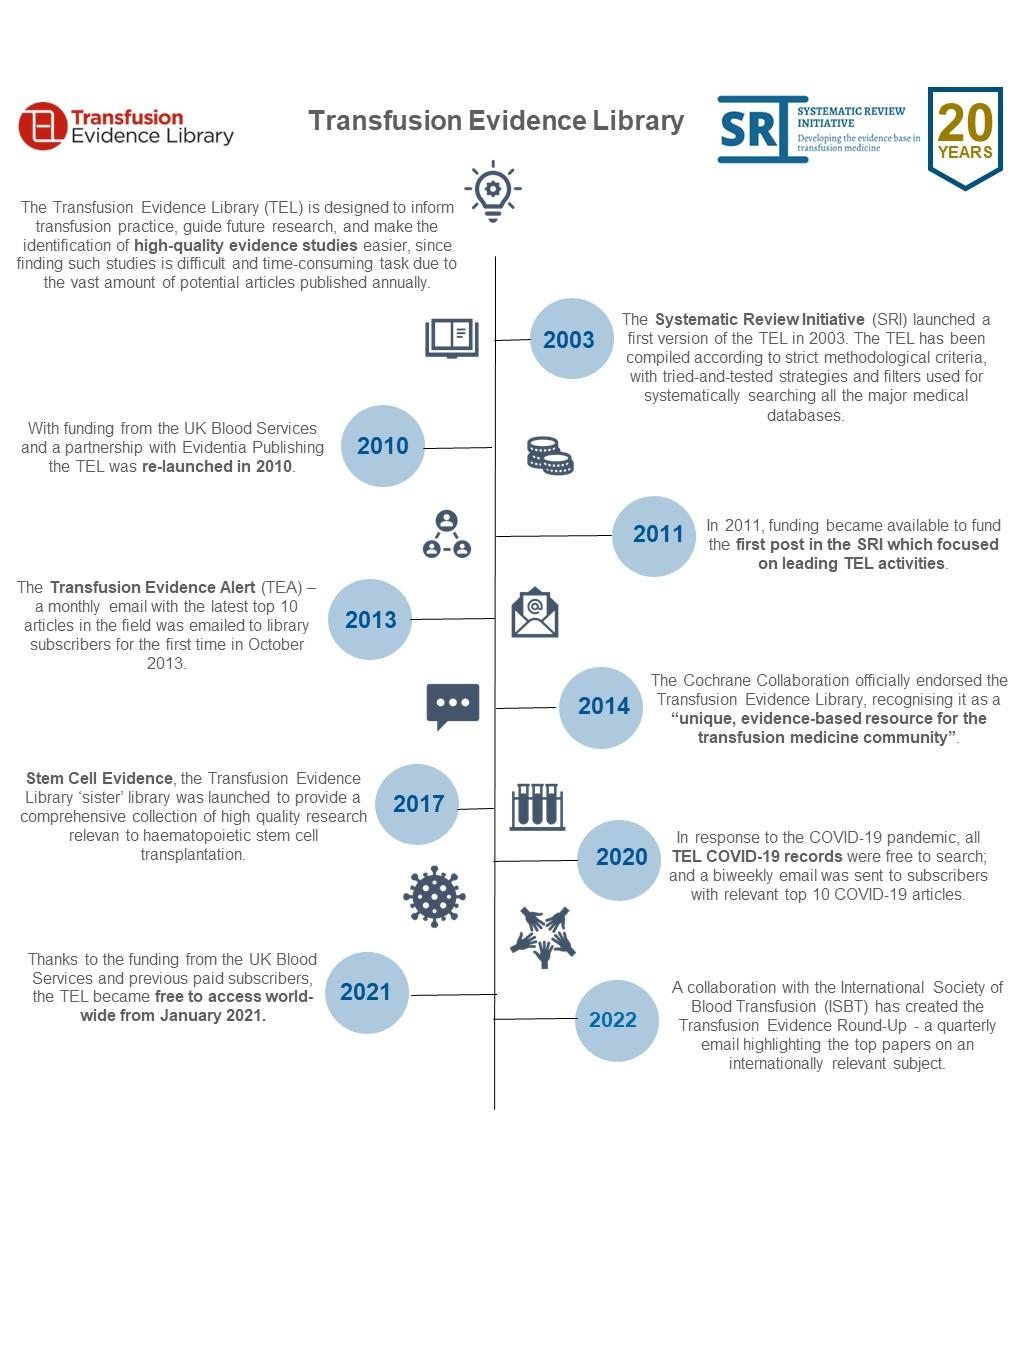 Infographic showing the history of the Transfusion Evidence Library